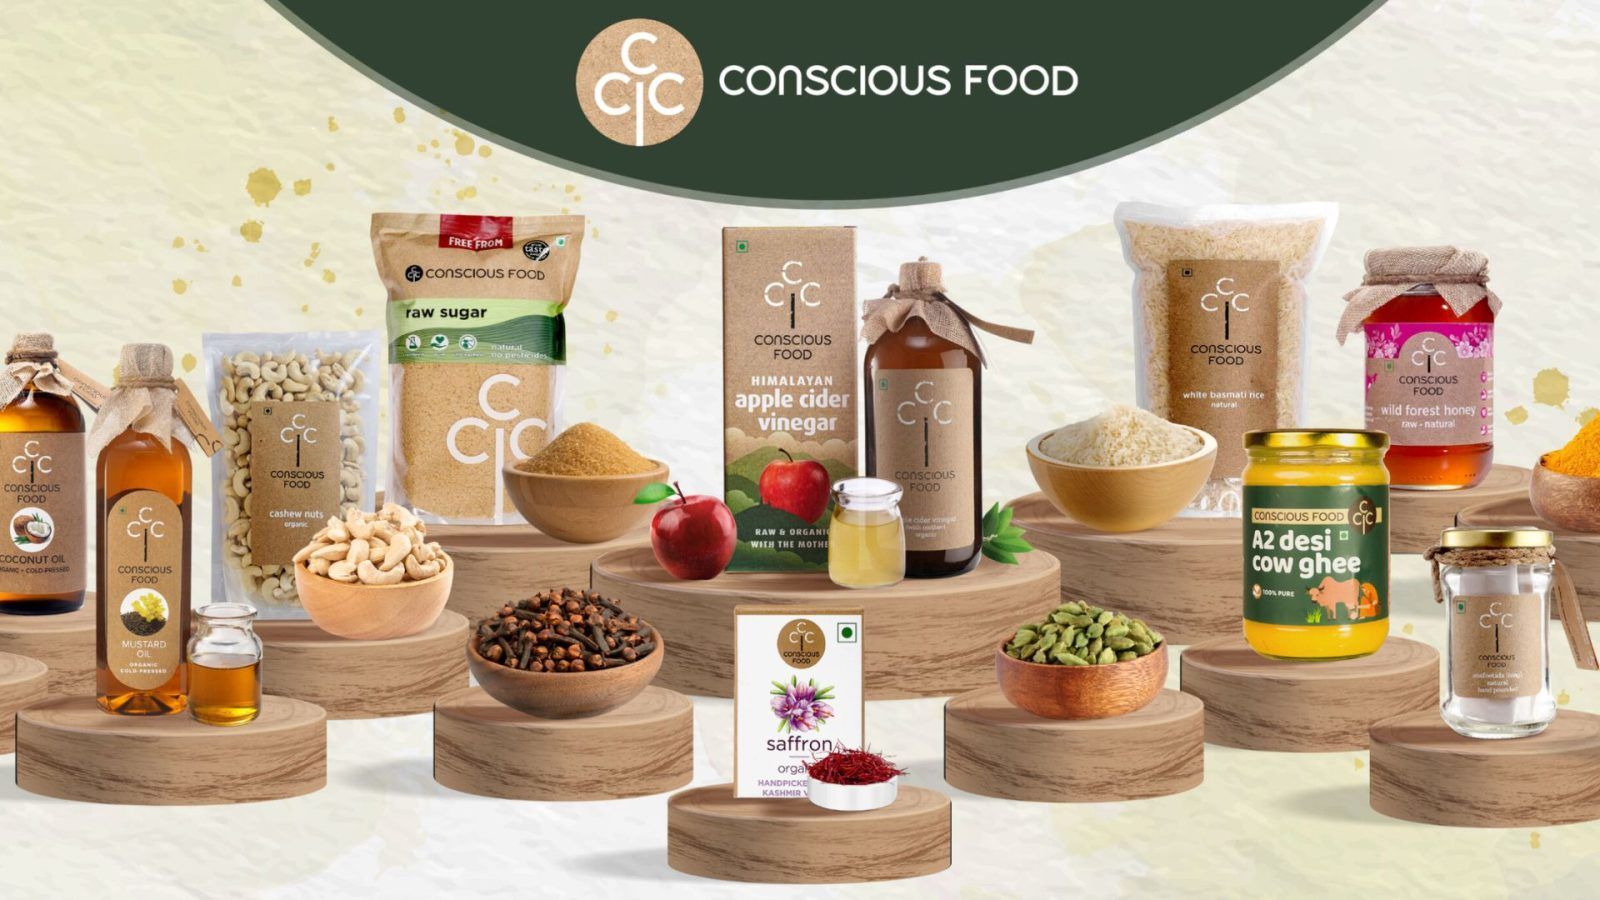 Become Sustainable With Conscious Food's Planet-friendly Model